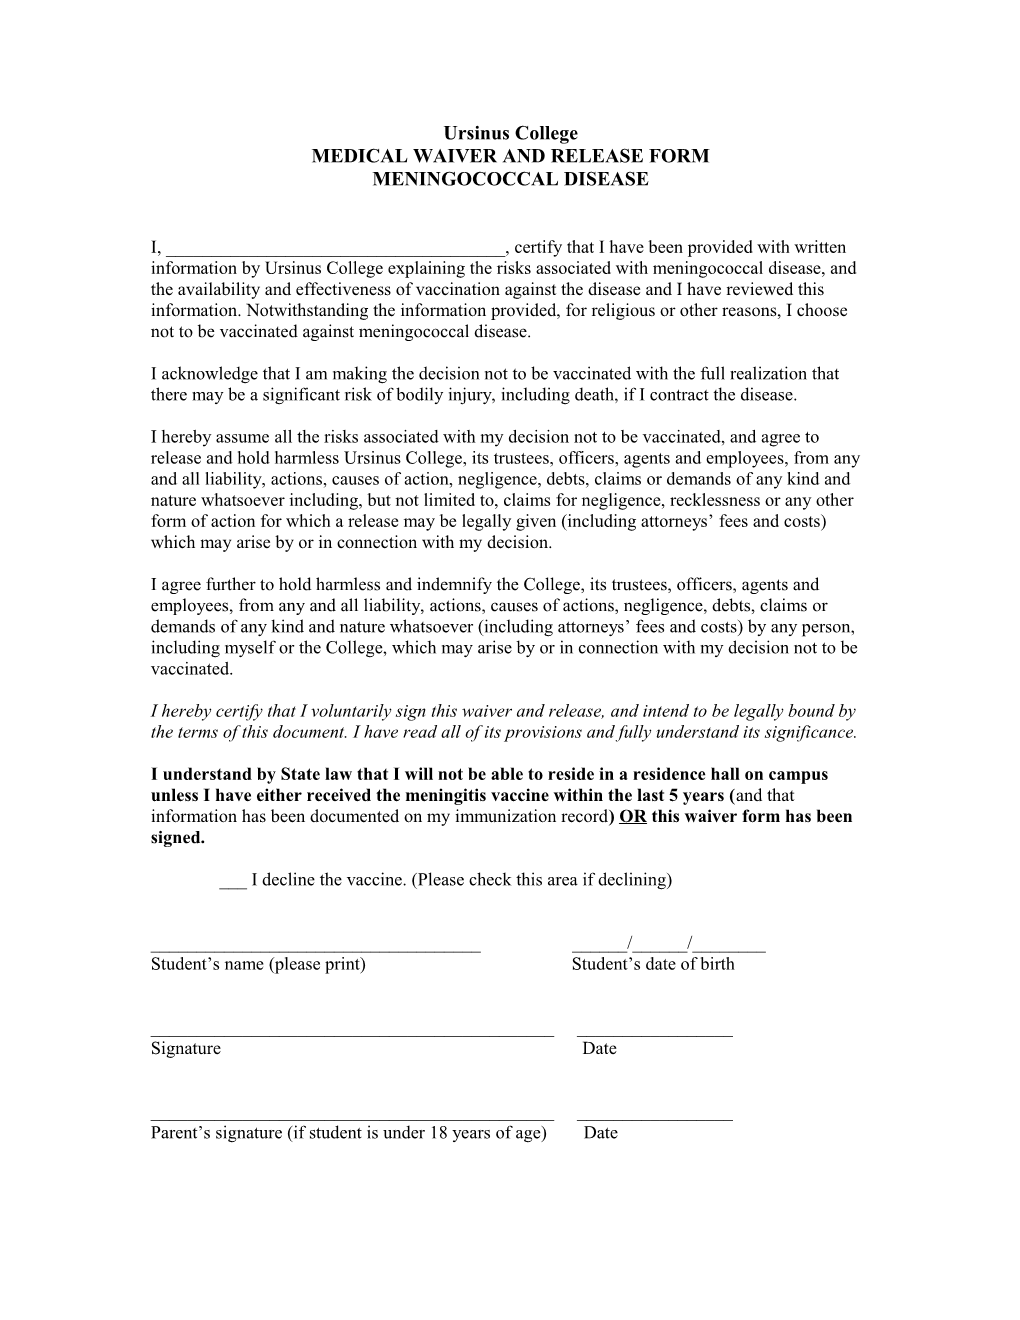 Medical Waiver and Release Form